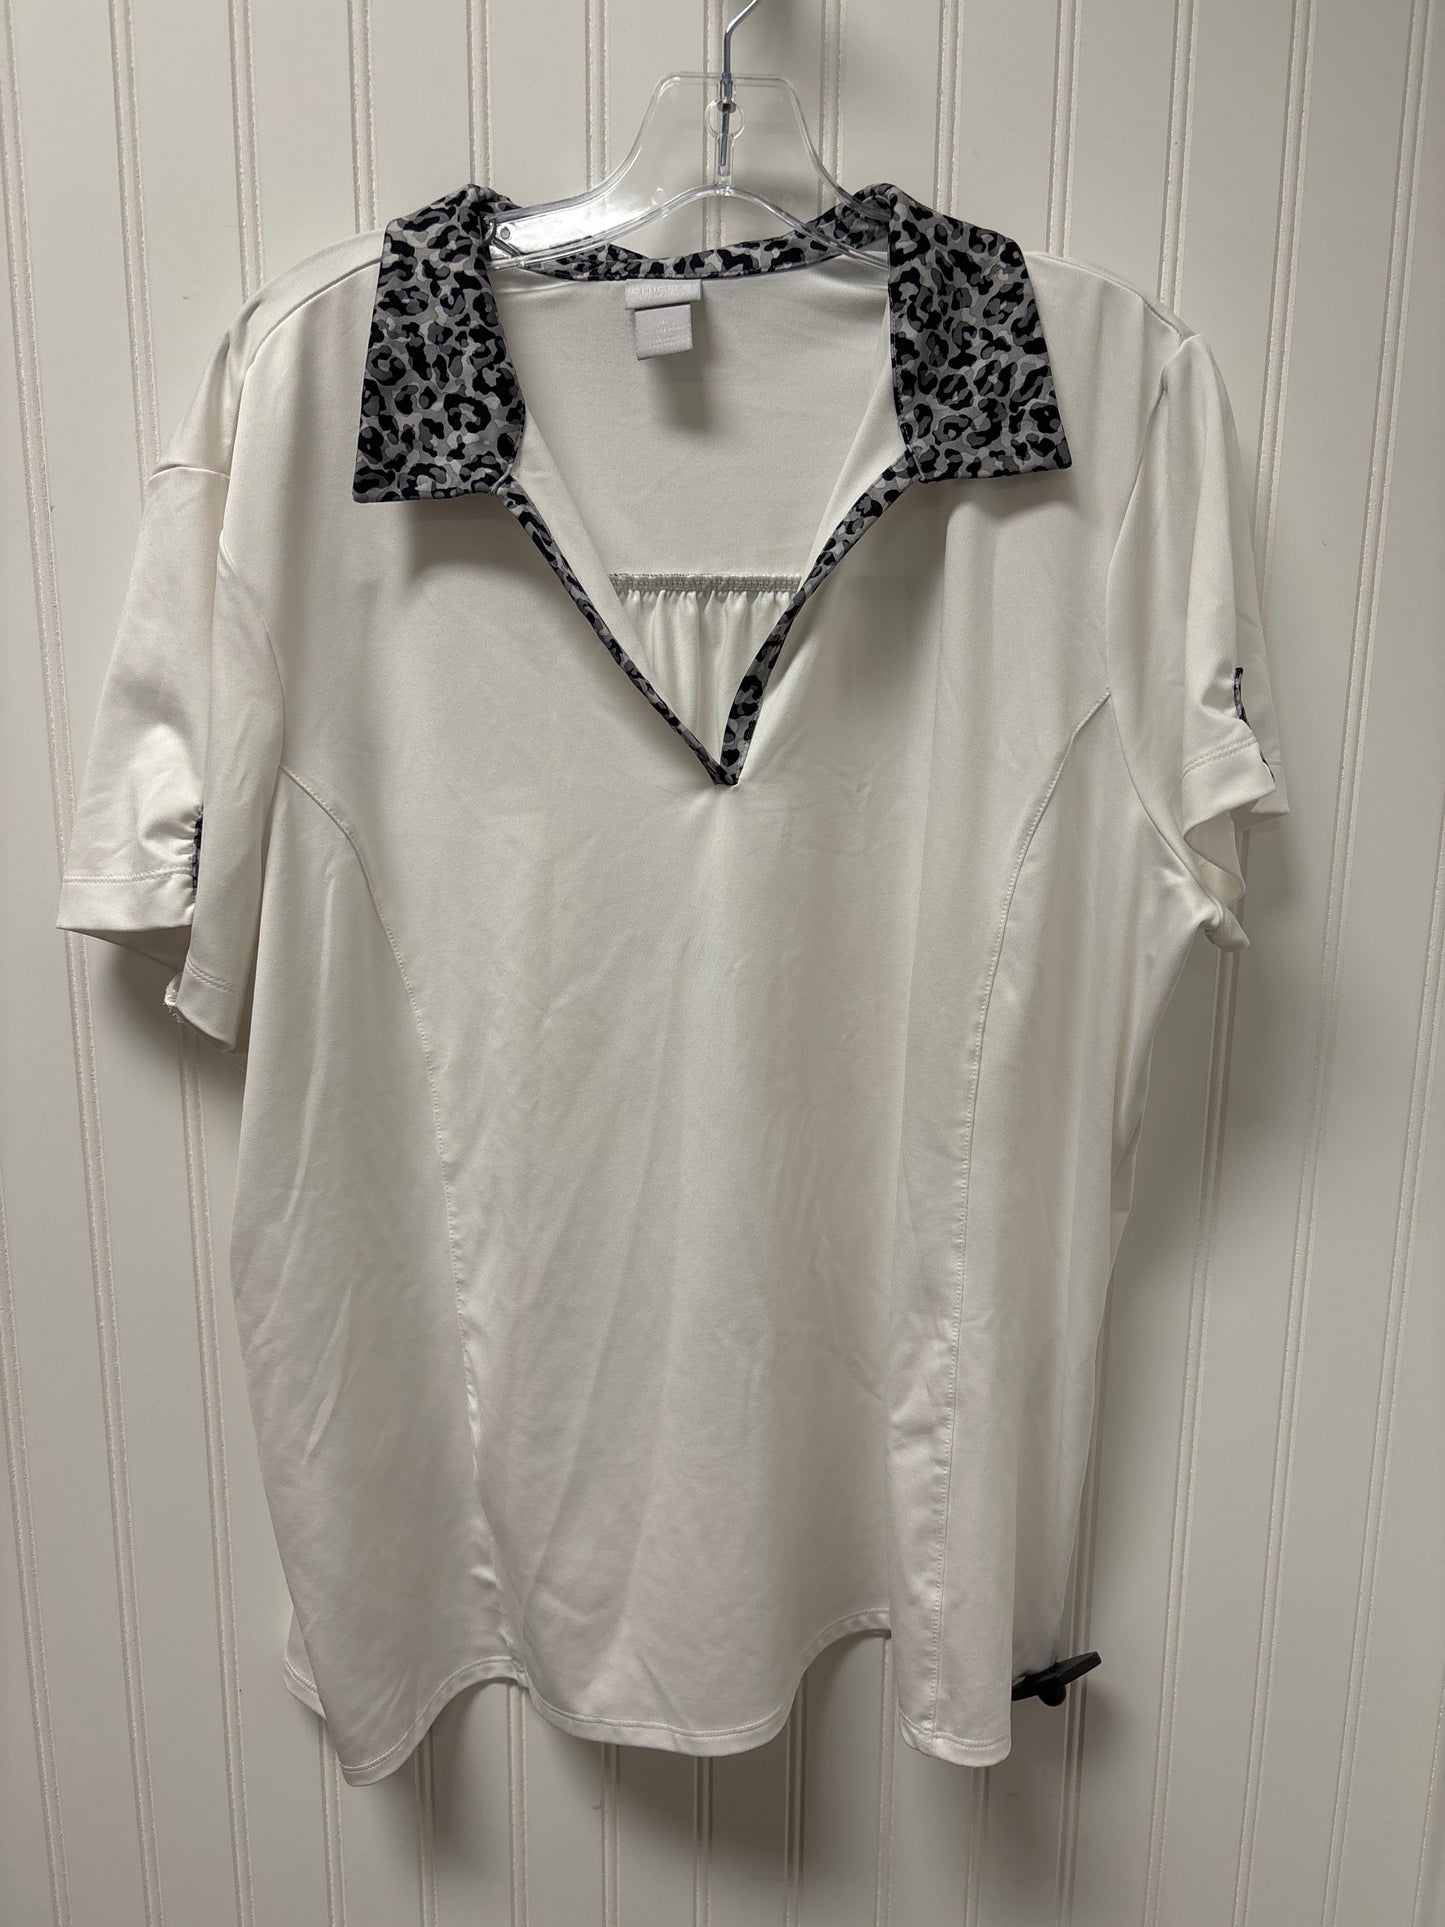 White Athletic Top Short Sleeve Chicos, Size 1x